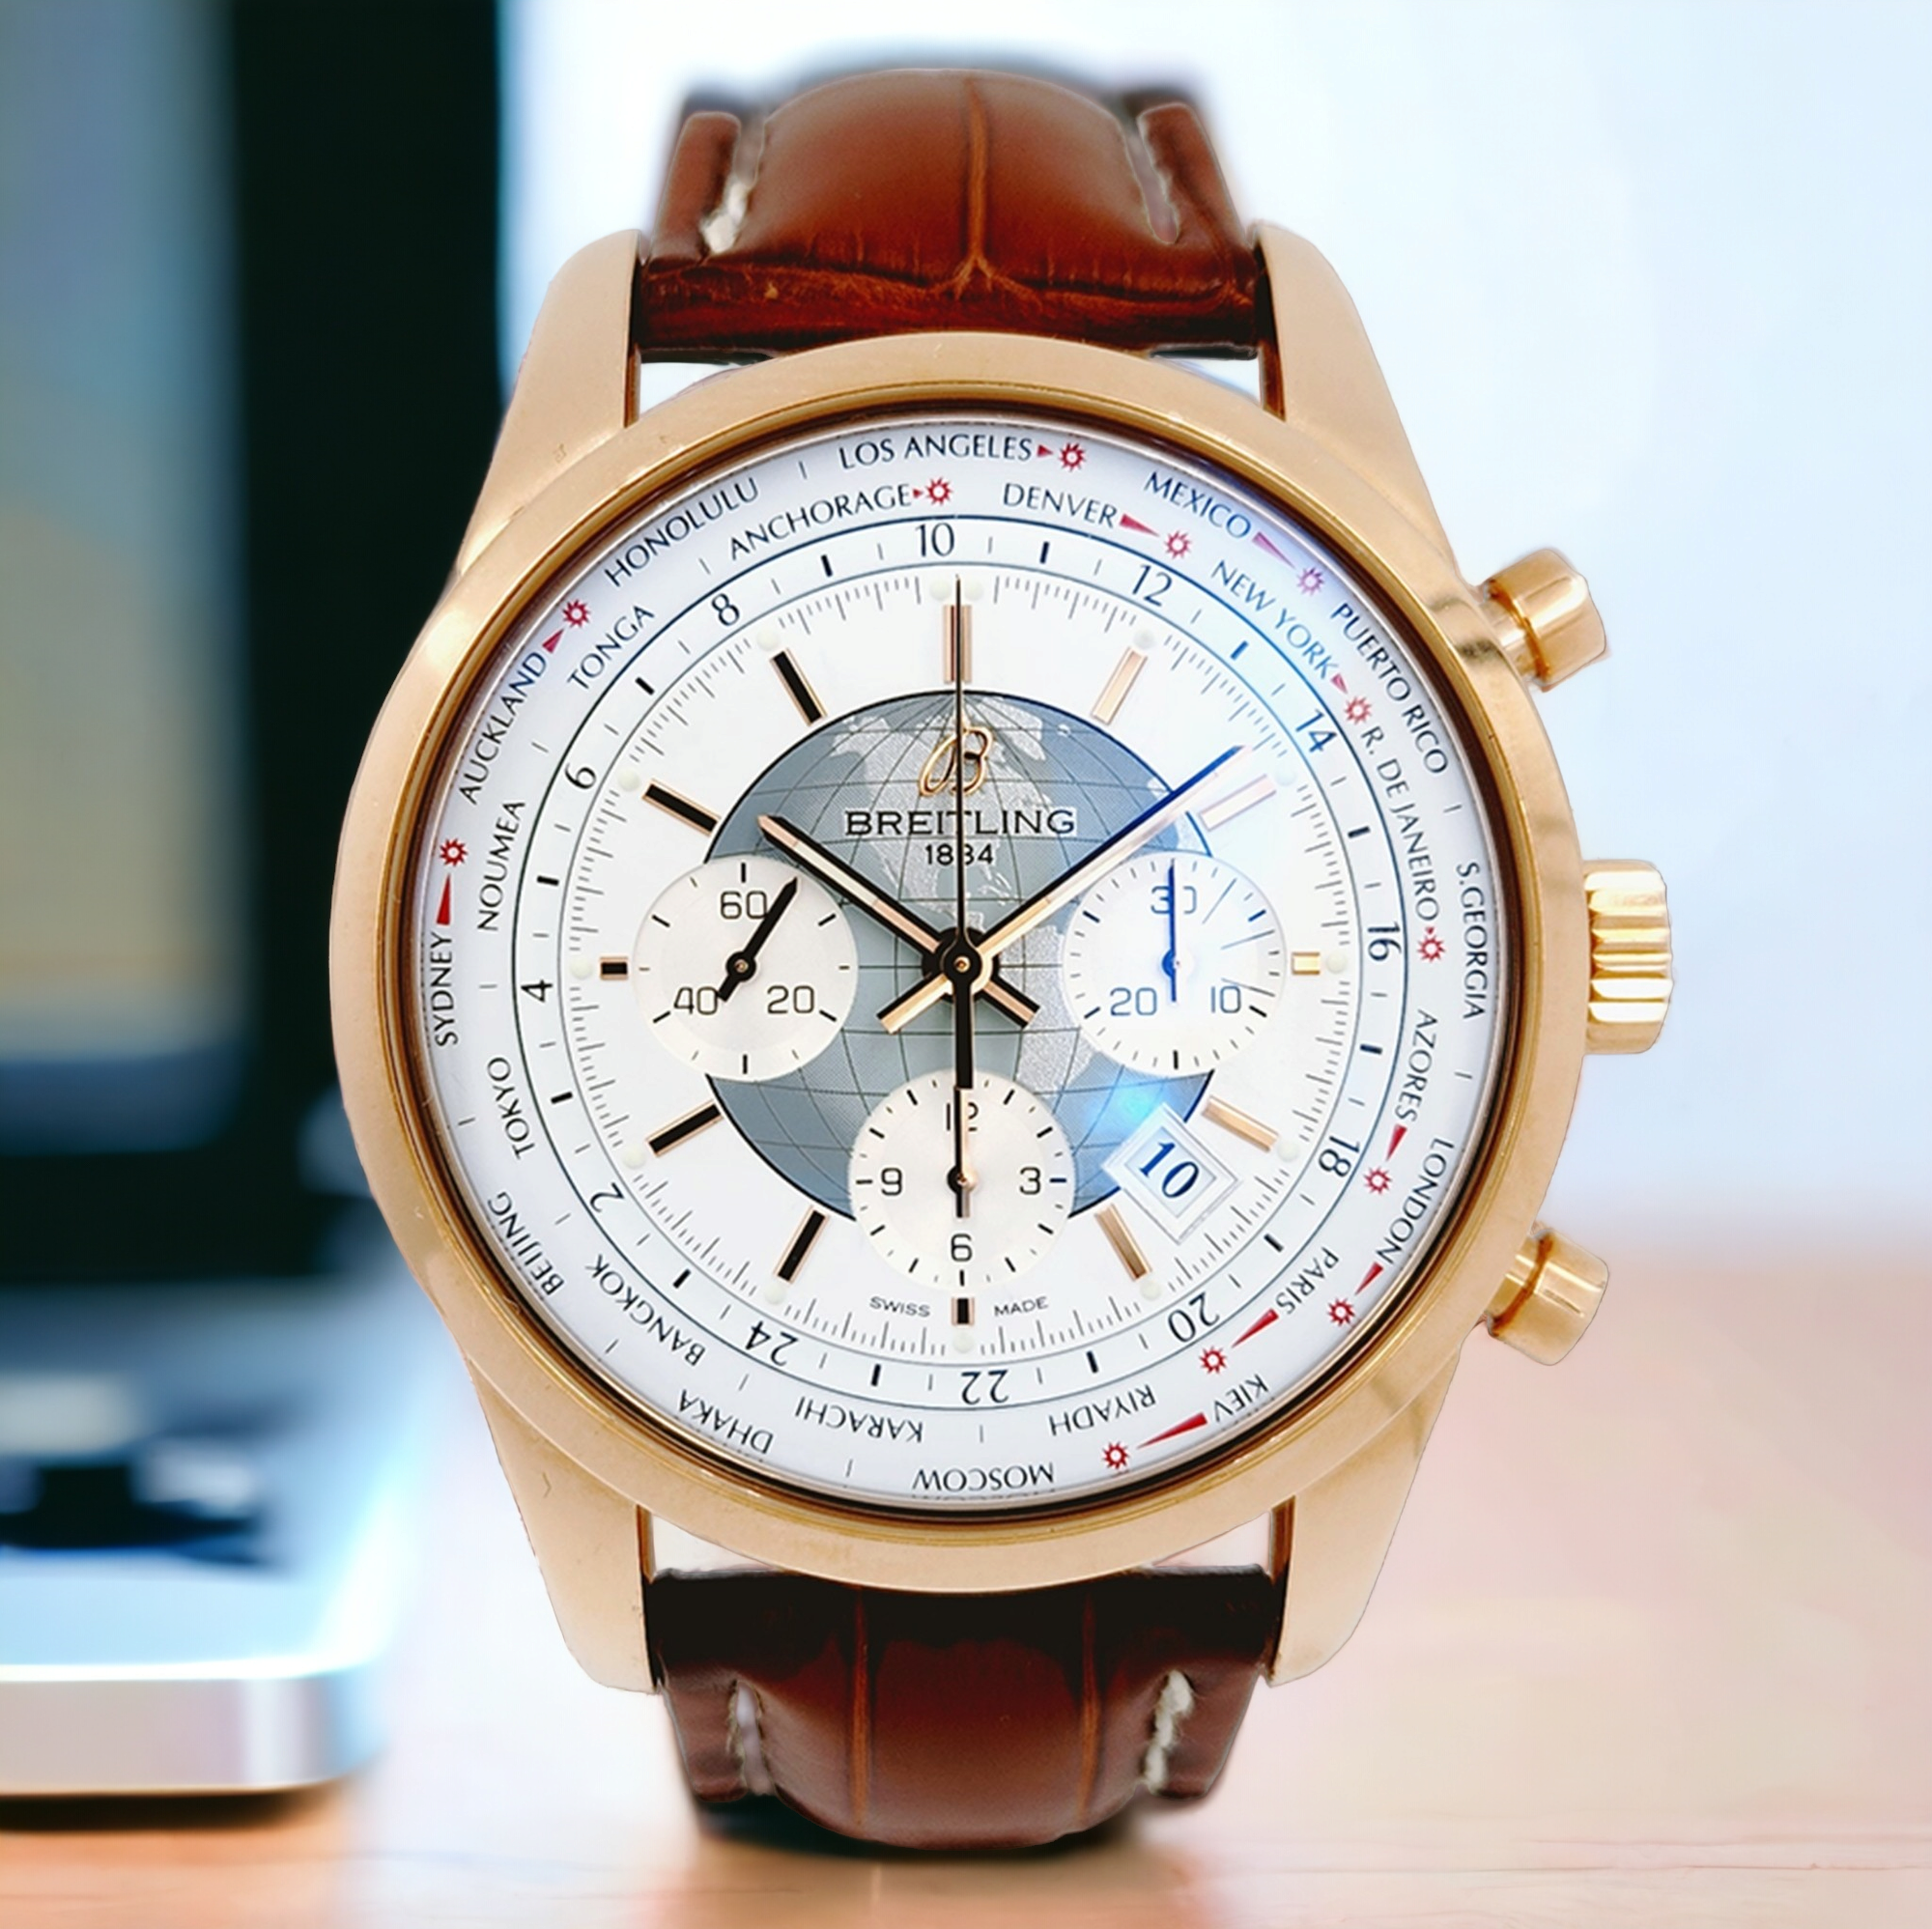 *Men's Breitling 46mm Transocean Watch in 18K Rose Gold with Brown Leather Band and White Chronograph Dial. (Pre-Owned)